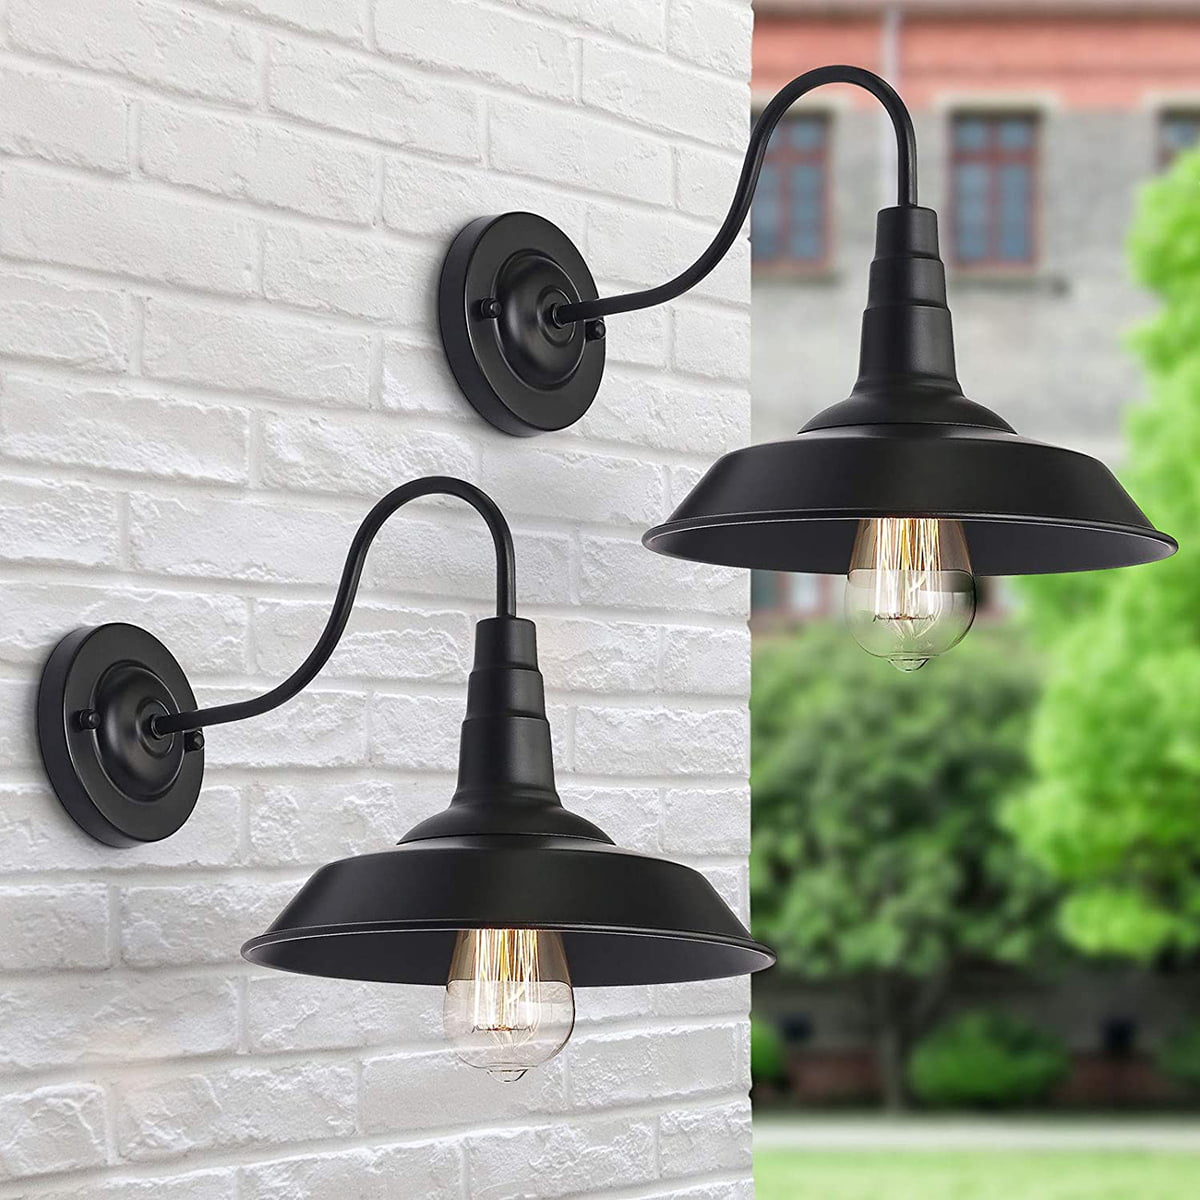 US 2pcs Wall Light Fixtures Rustic Vintage Iron Sconce Outdoor Edison Lamp Shade 